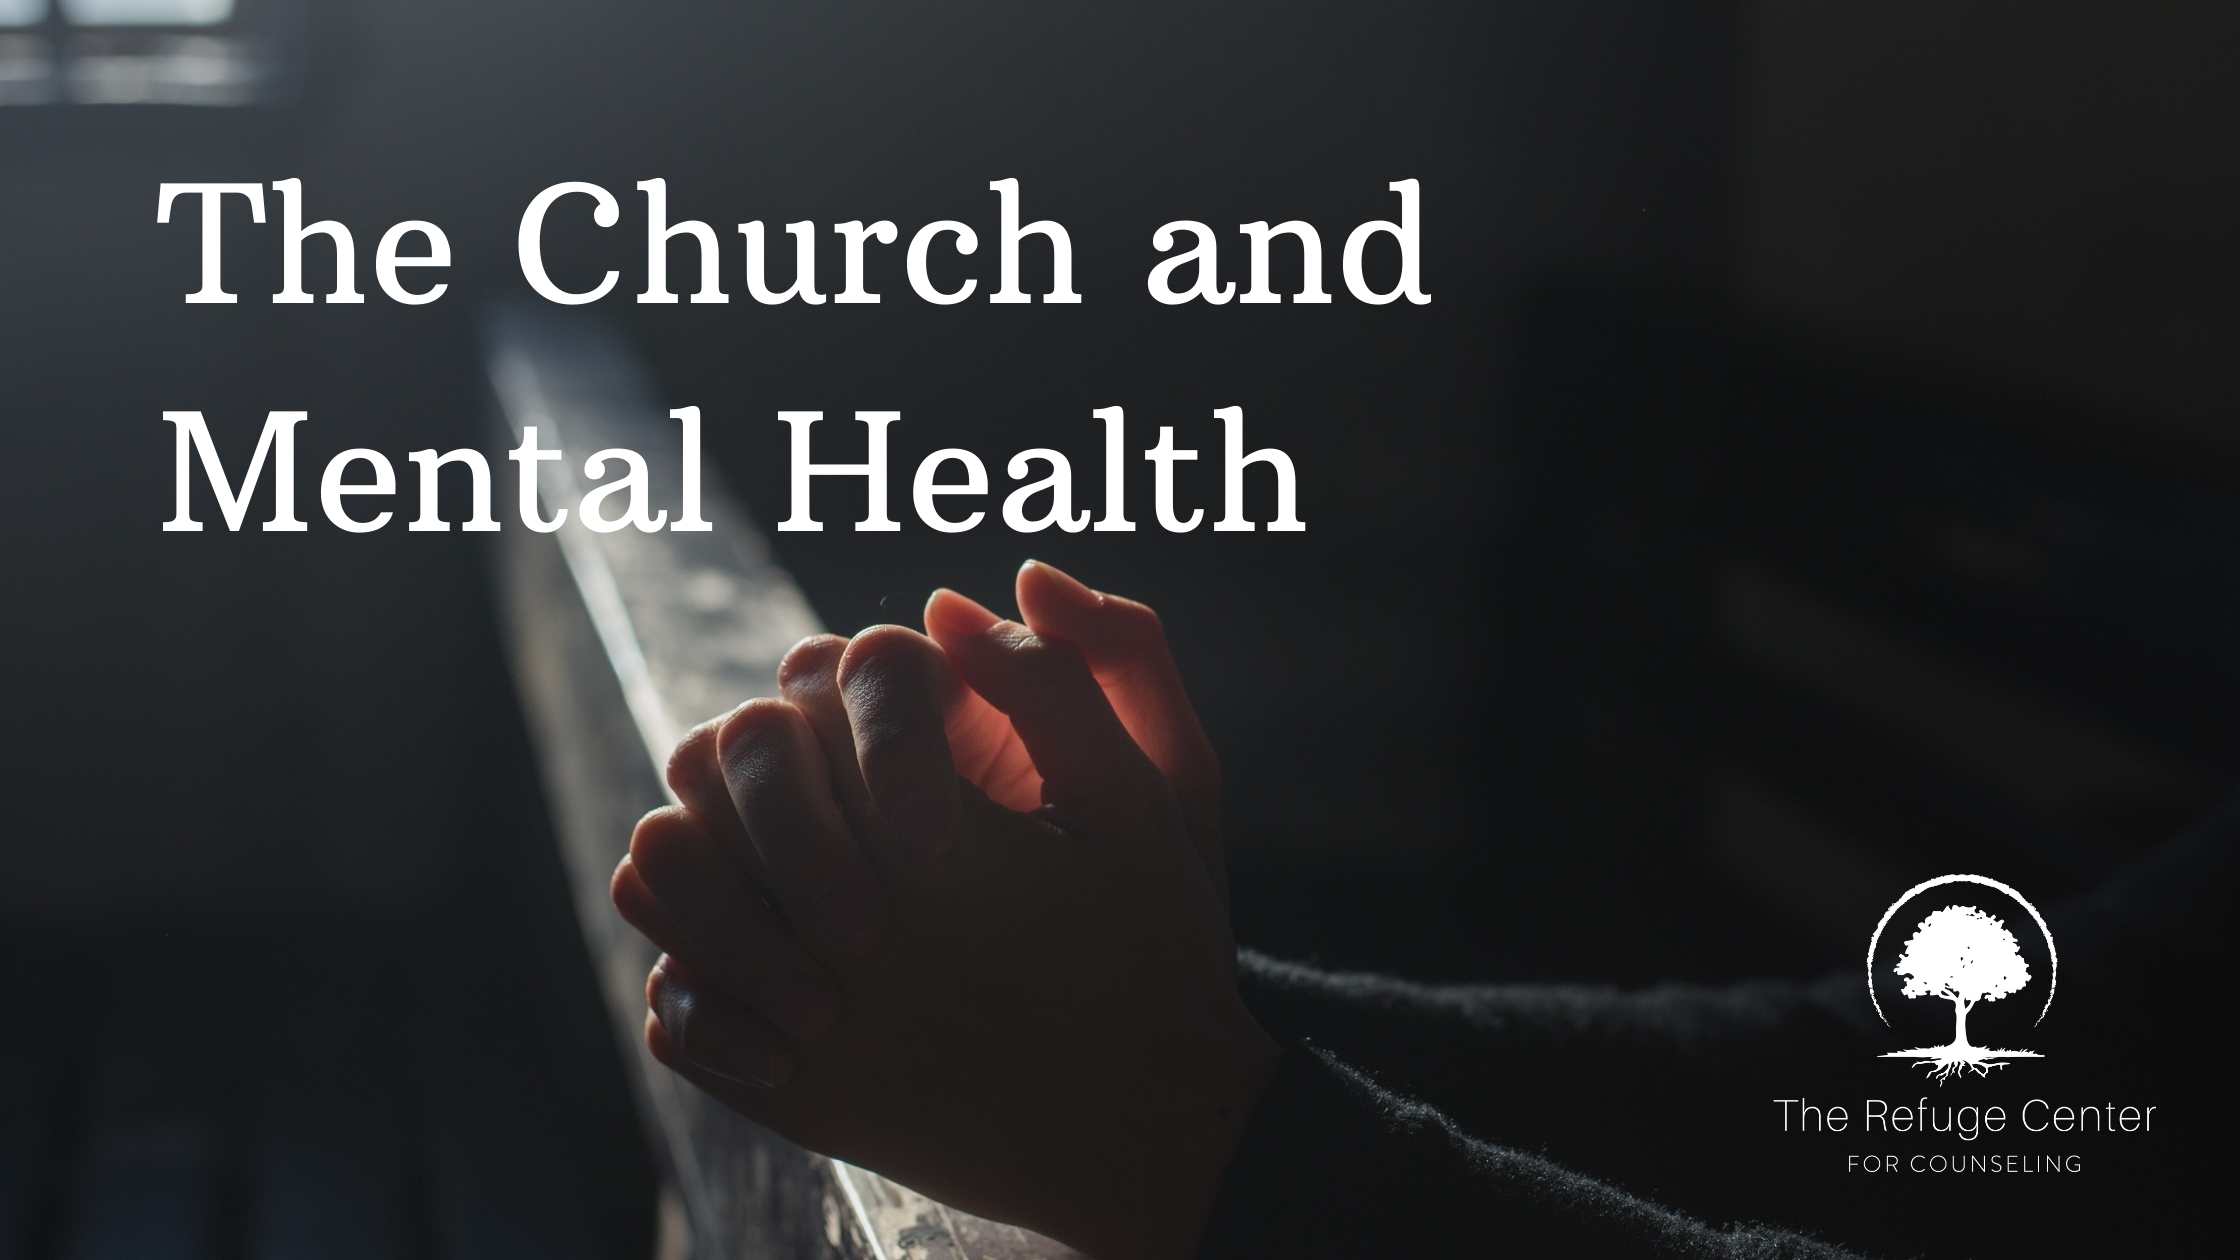 The church and mental health